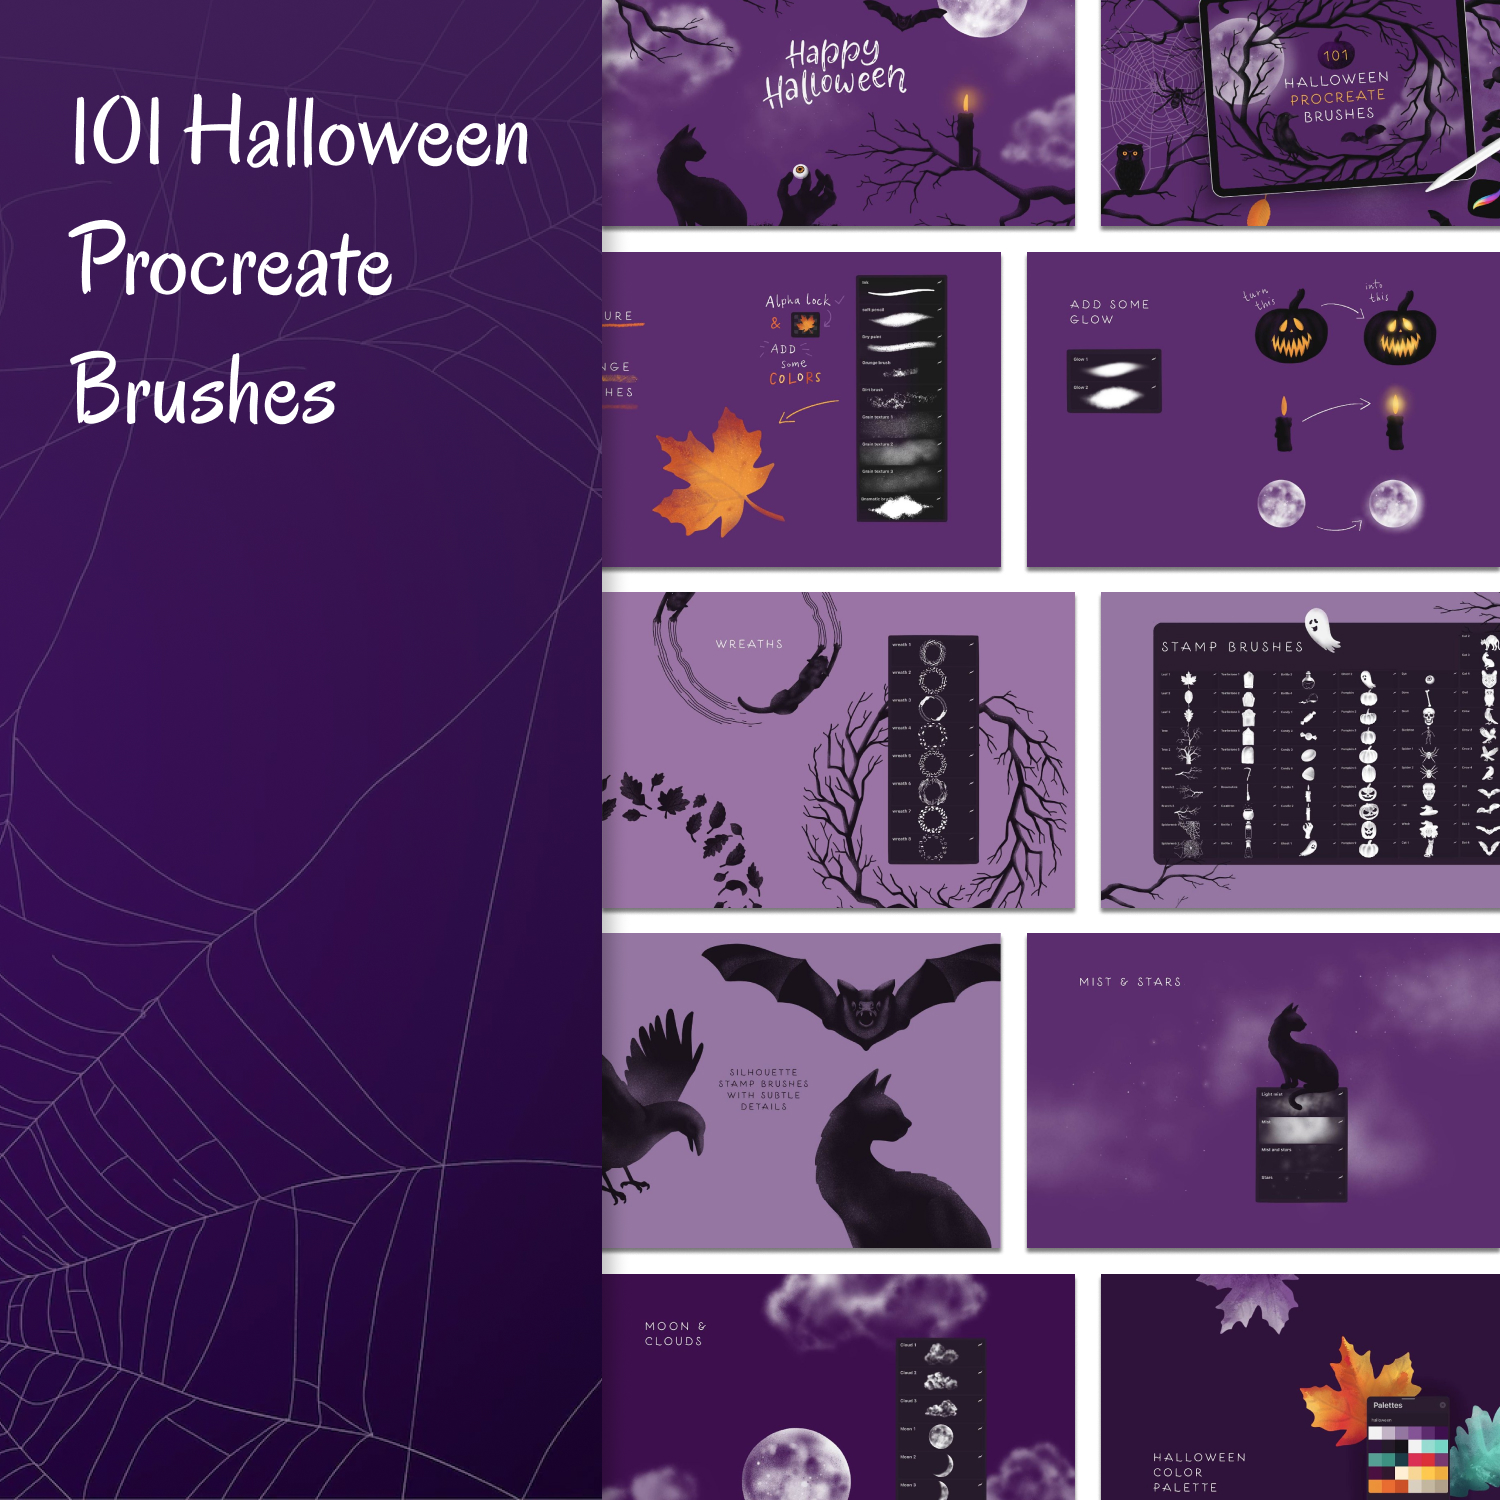 Halloween procreate brushes print preview.